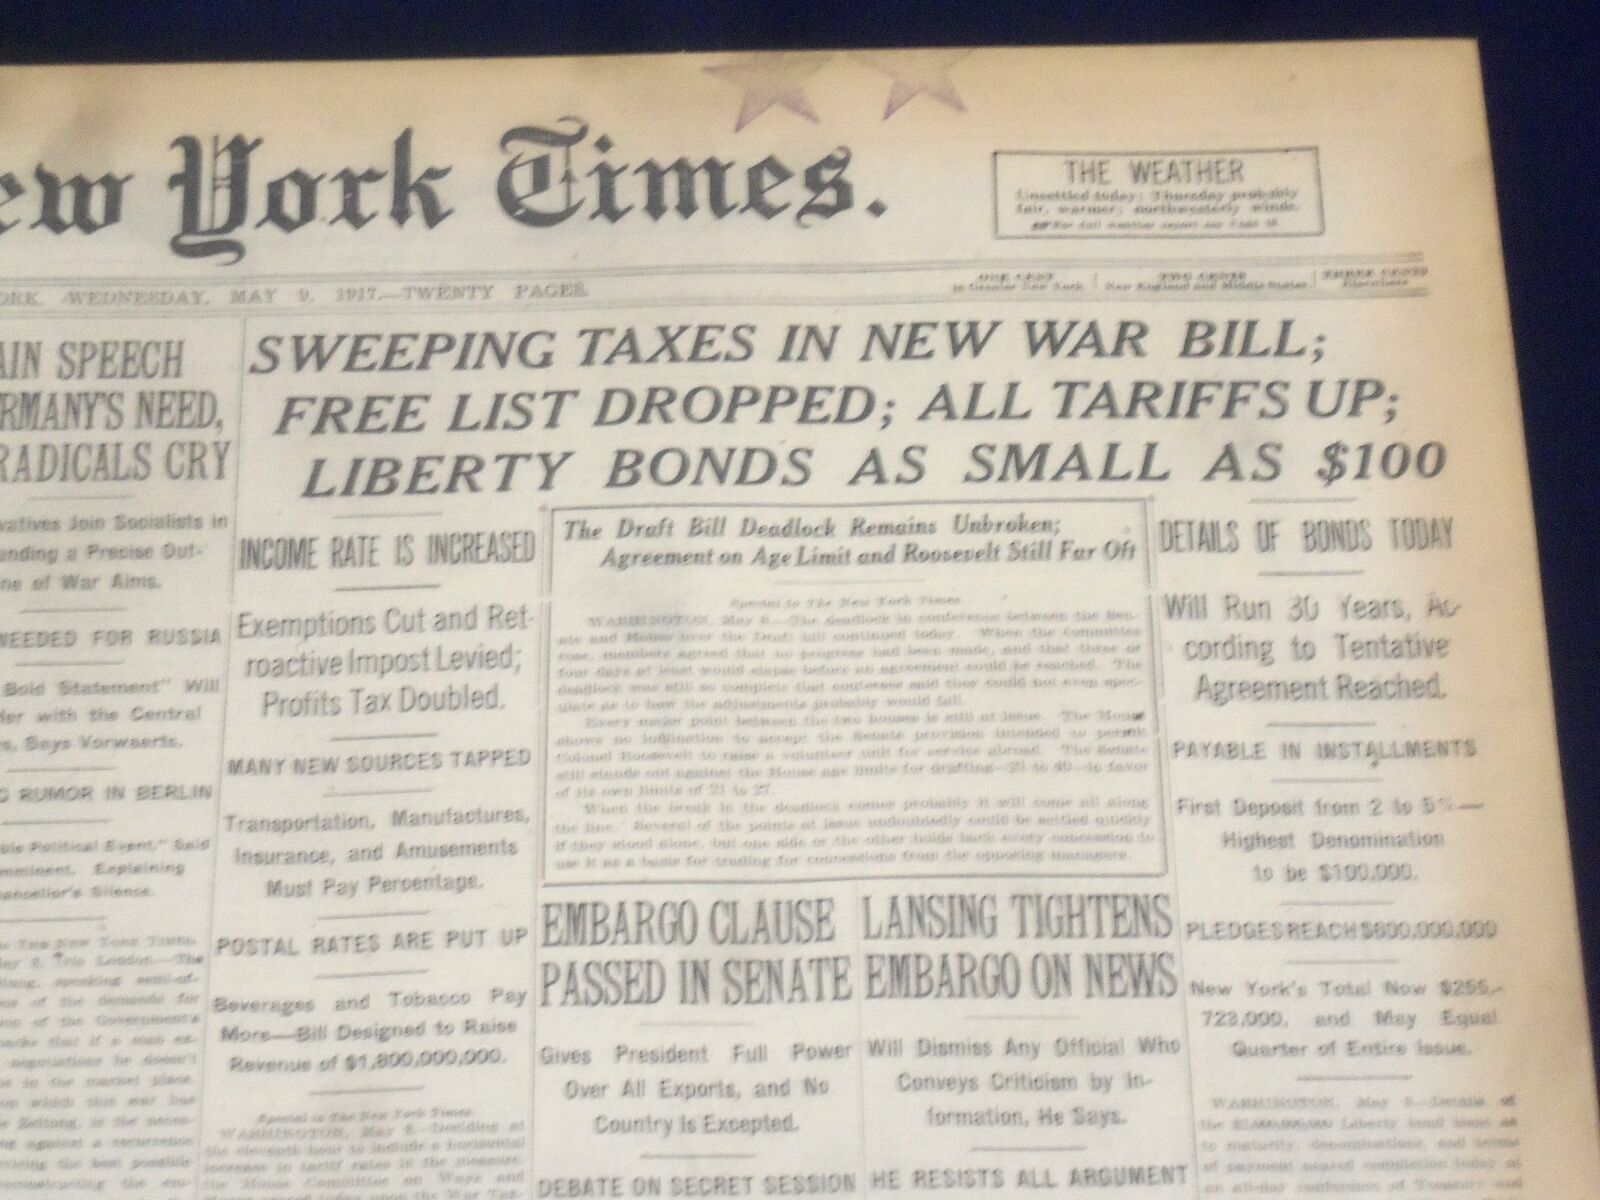 1917 MAY 9 NEW YORK TIMES - SWEEPING TAXES IN NEW WAR BILL - NT 9138